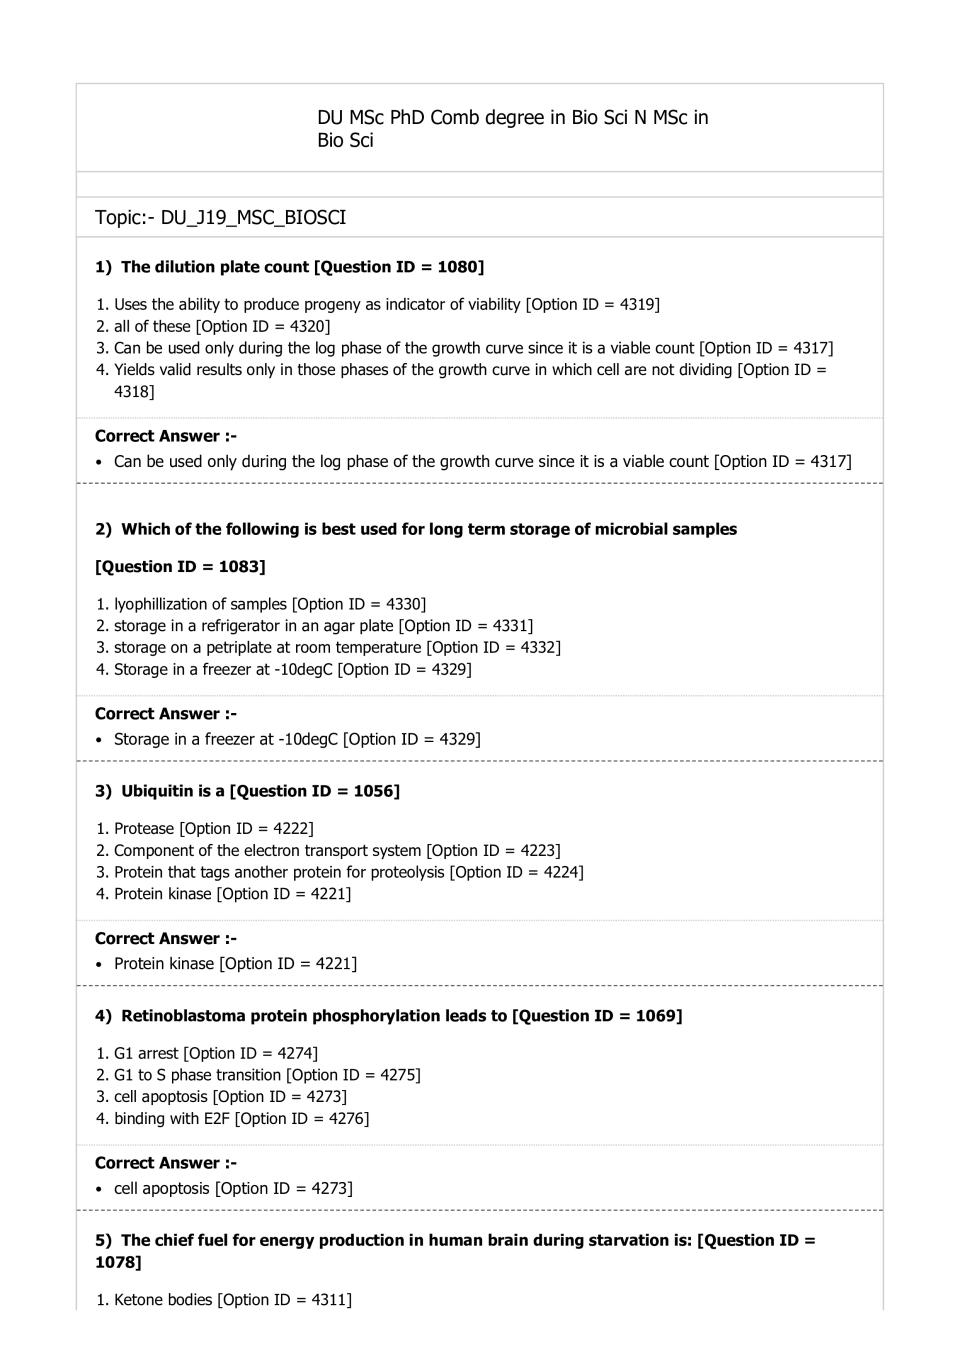 DUET Question Paper 2019 for M.Sc  Ph.D Combined Degree (Biomedical Research) - Page 1